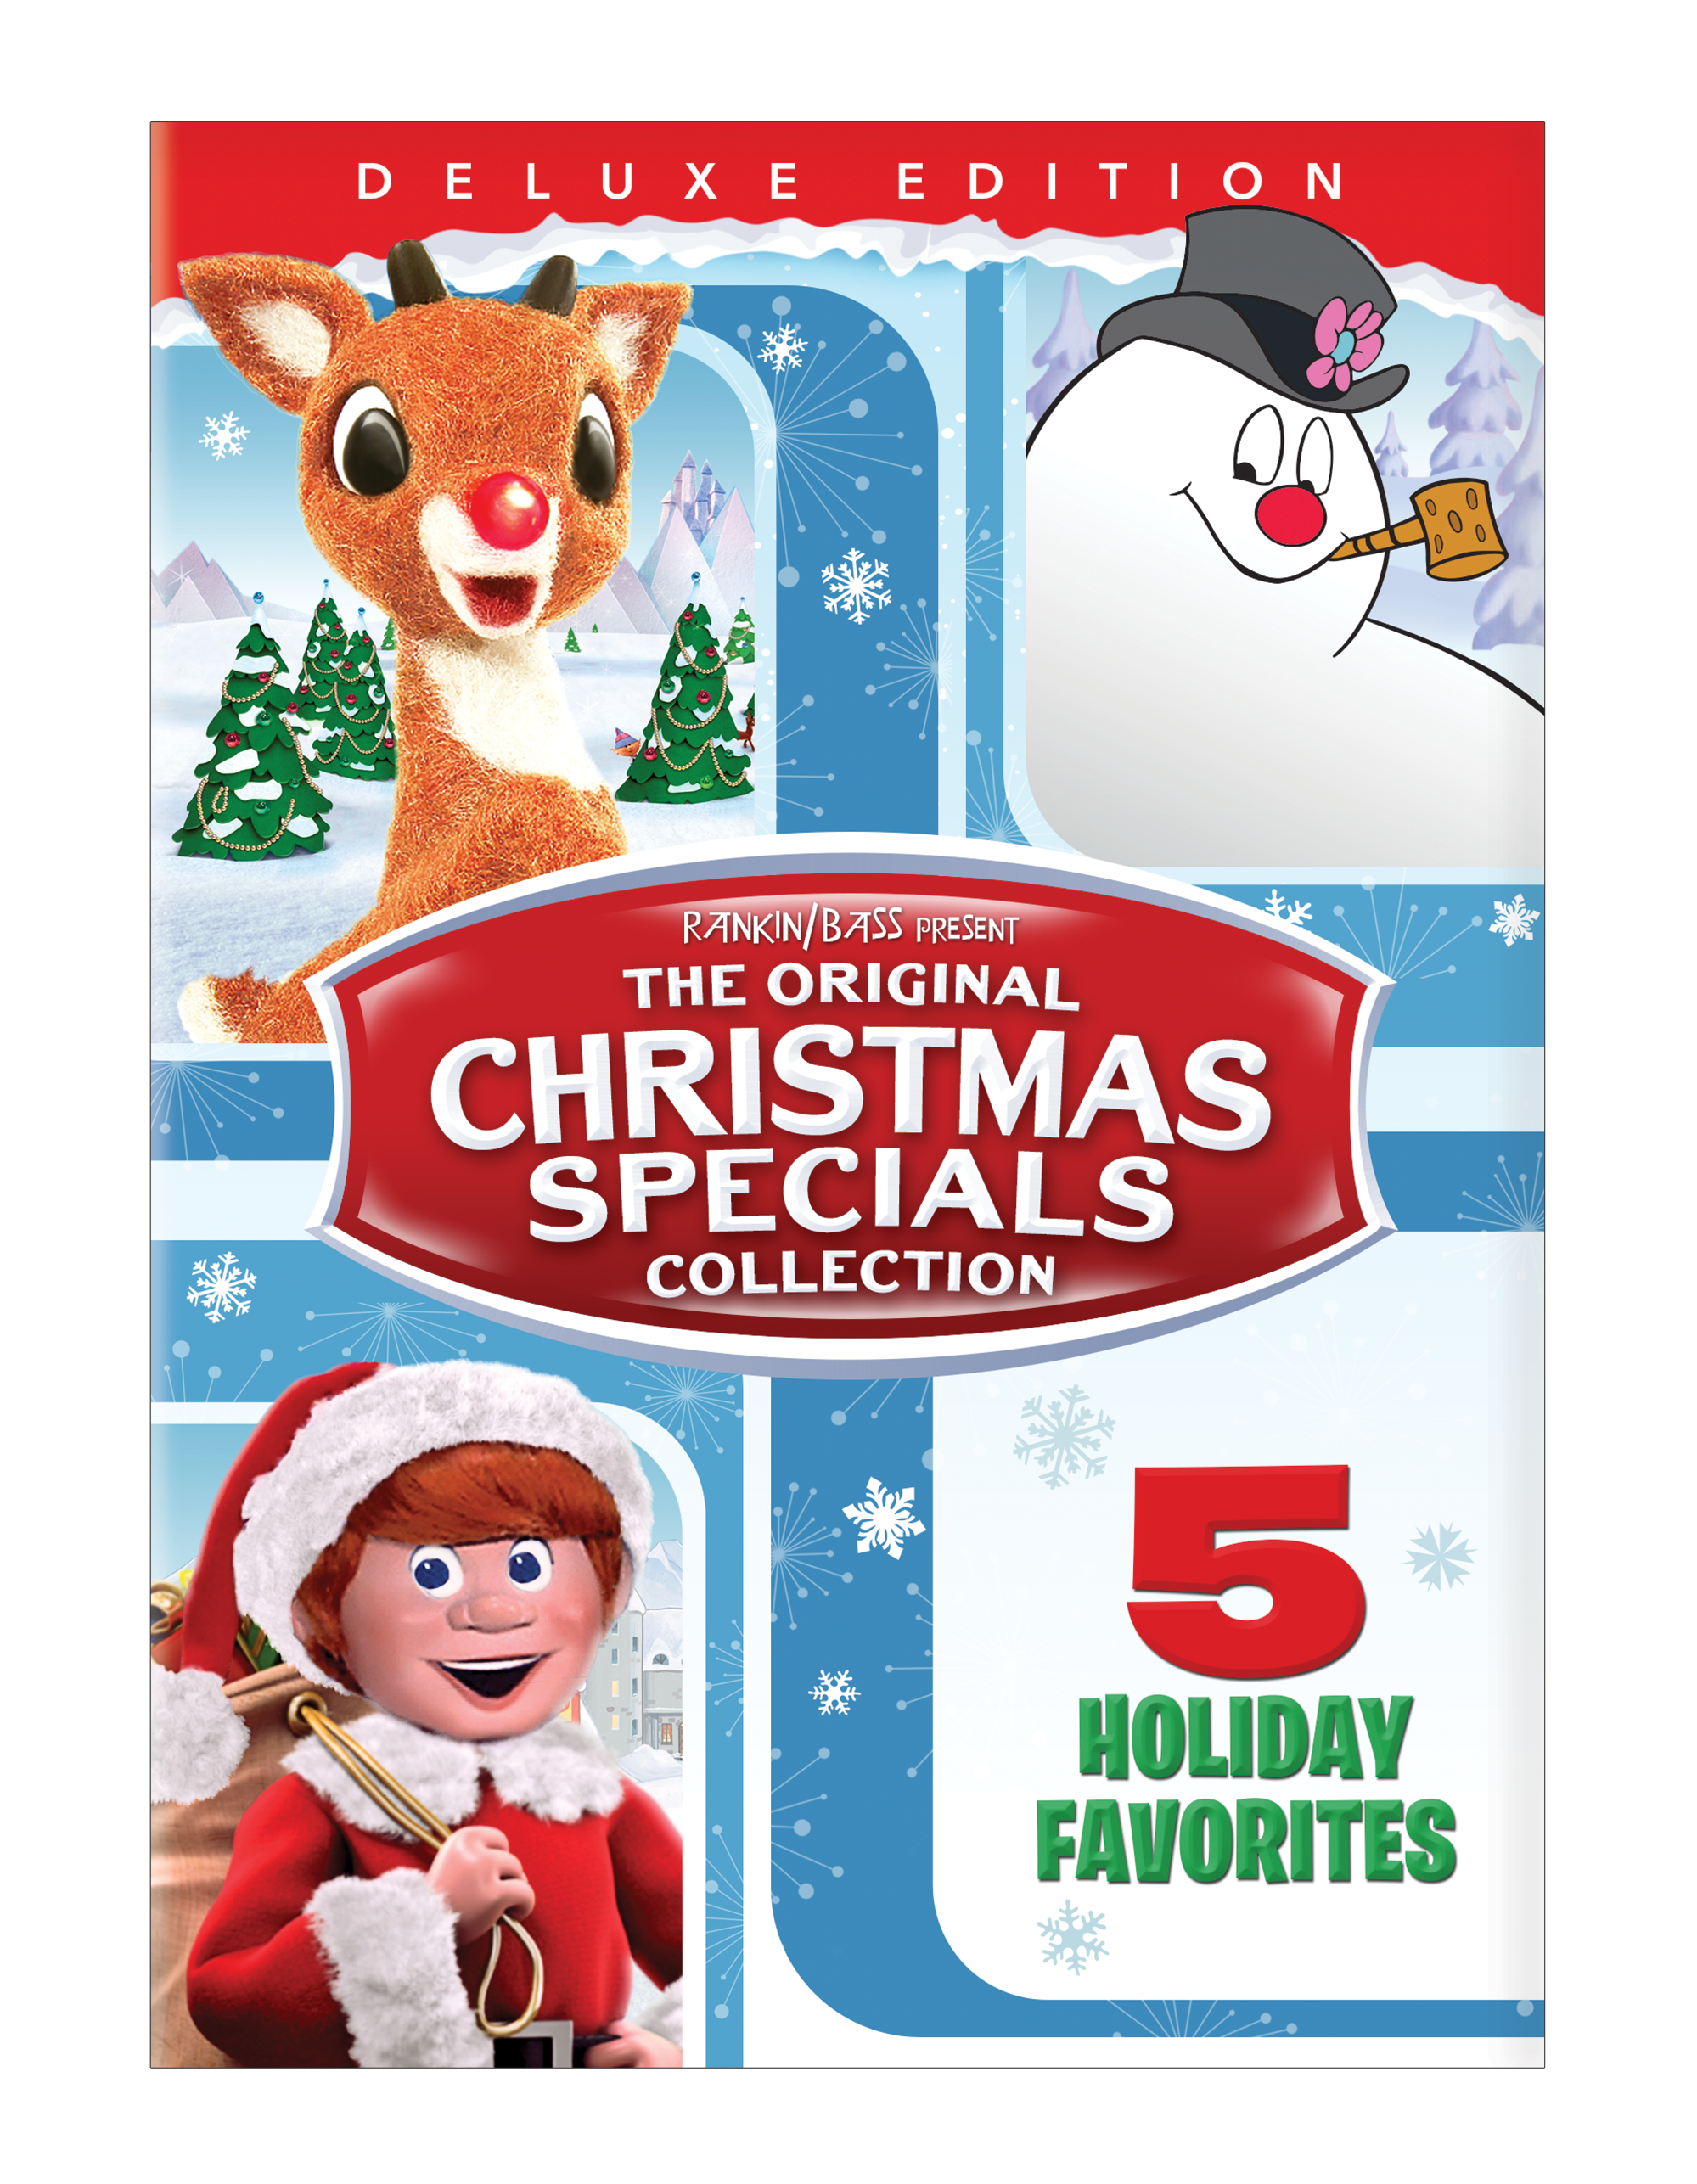 The Original Christmas Specials Collection Deluxe Edition Blu-Ray cover (Universal Pictures Home Entertainment)